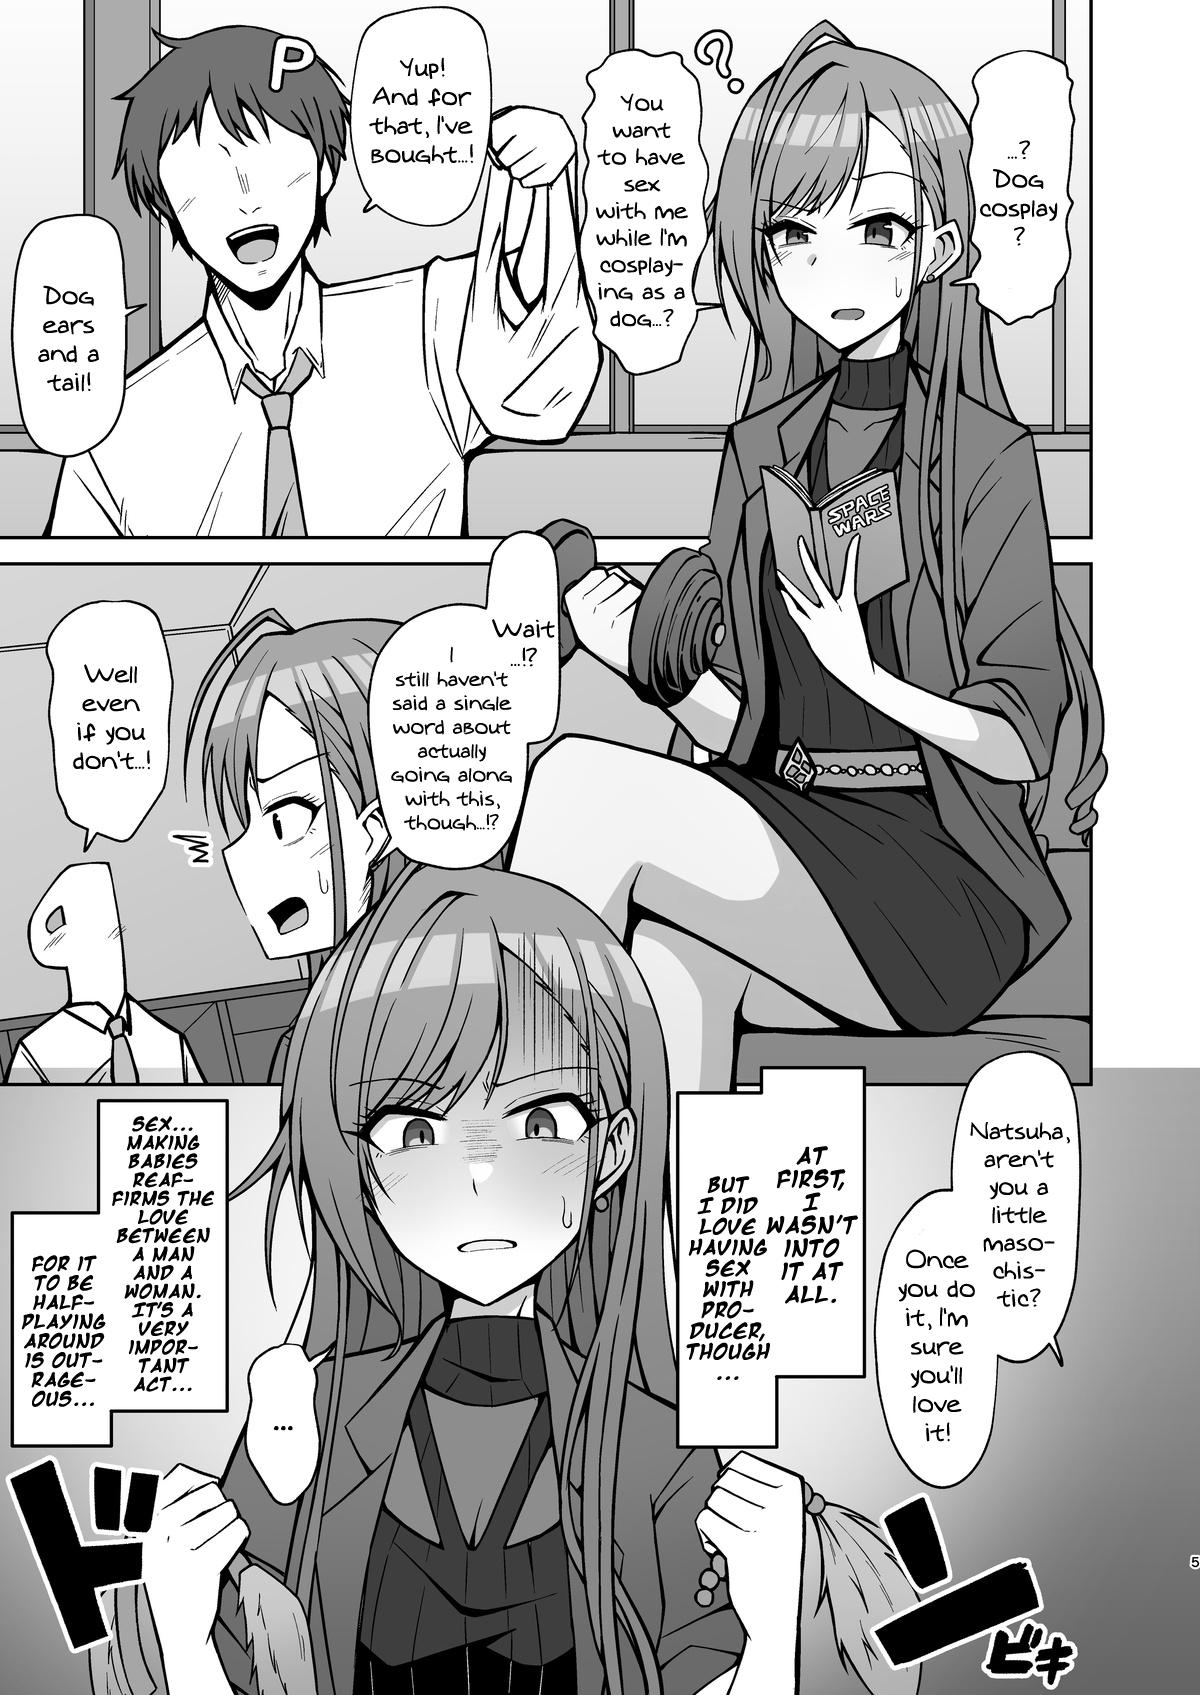 Bro InuCos H tte Sugoi no yo! | Fucking While Dressed Like a Dog Feels Amazing! - The idolmaster Monster Cock - Page 4